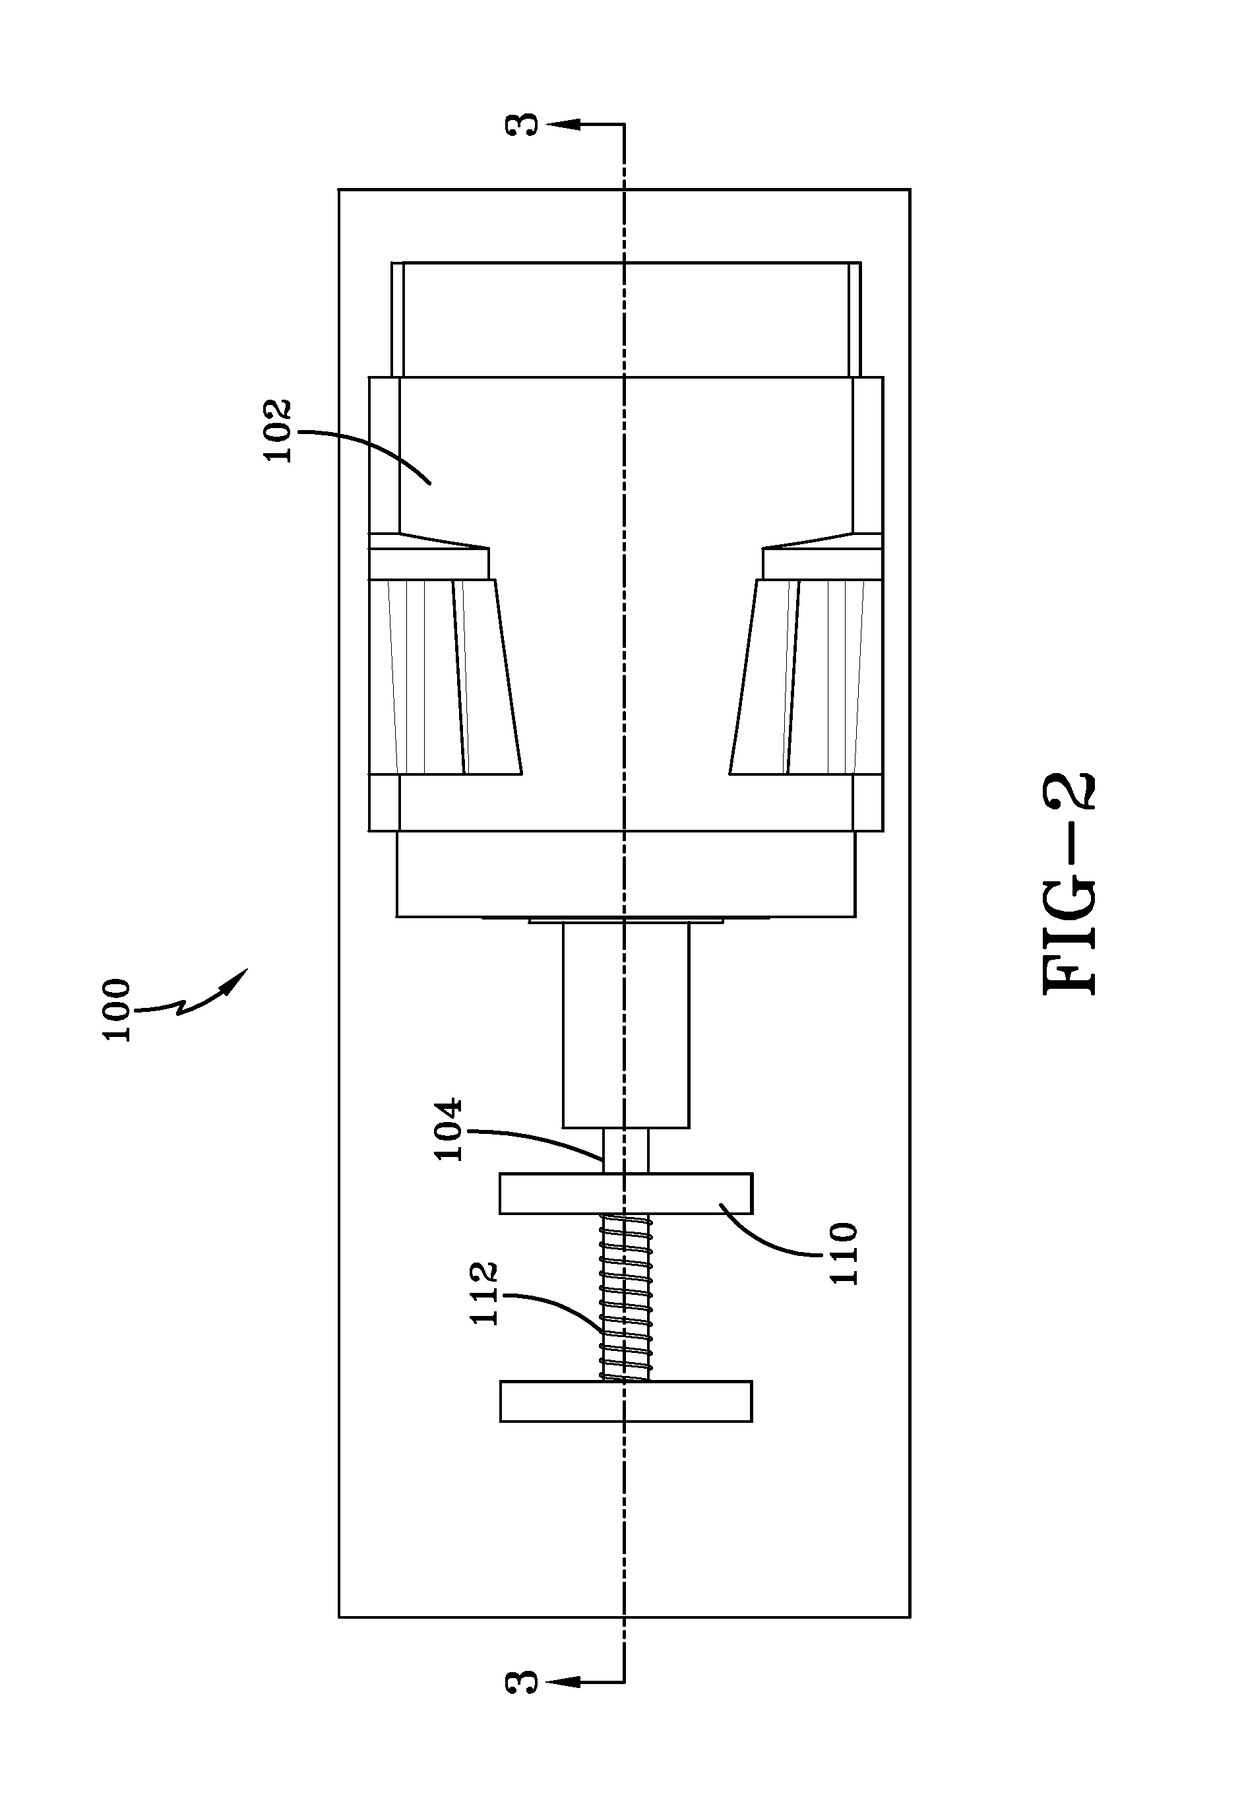 Thermal energy harvesting device